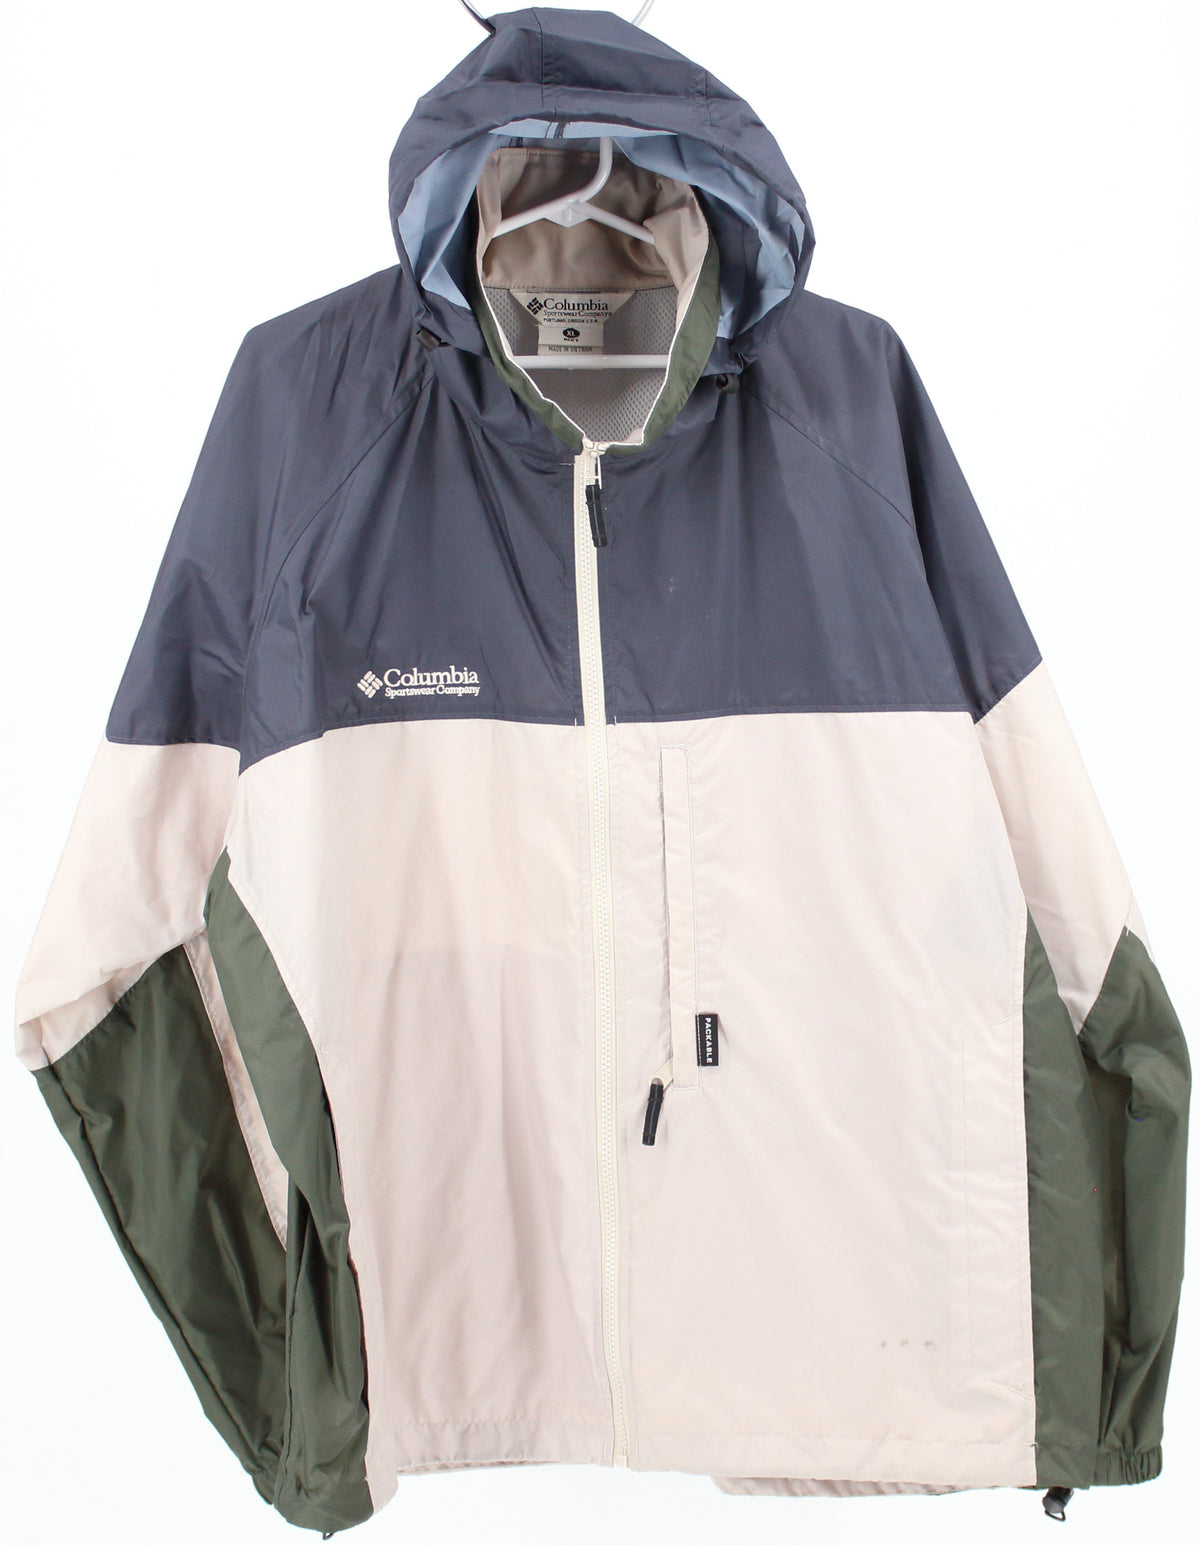 Columbia Blue, Green and Off White Nylon Jacket